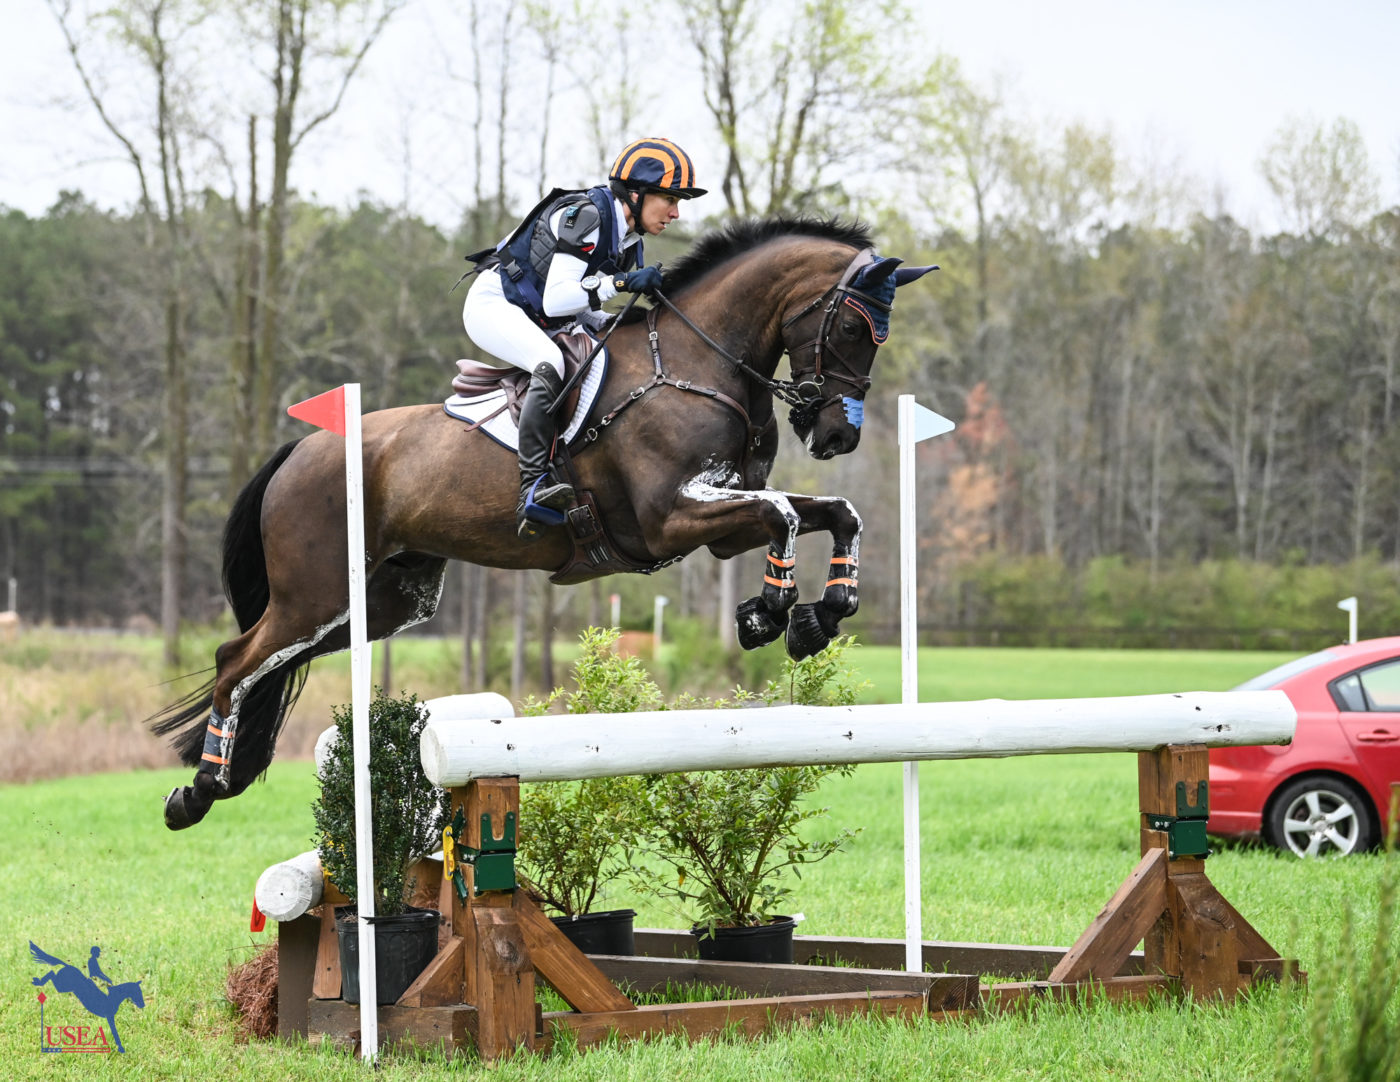 Liz Halliday-Sharp and Cooley Nutcracker concluded their ride around the CCI3*-S track in fifth place. USEA/Lindsay Berreth photo